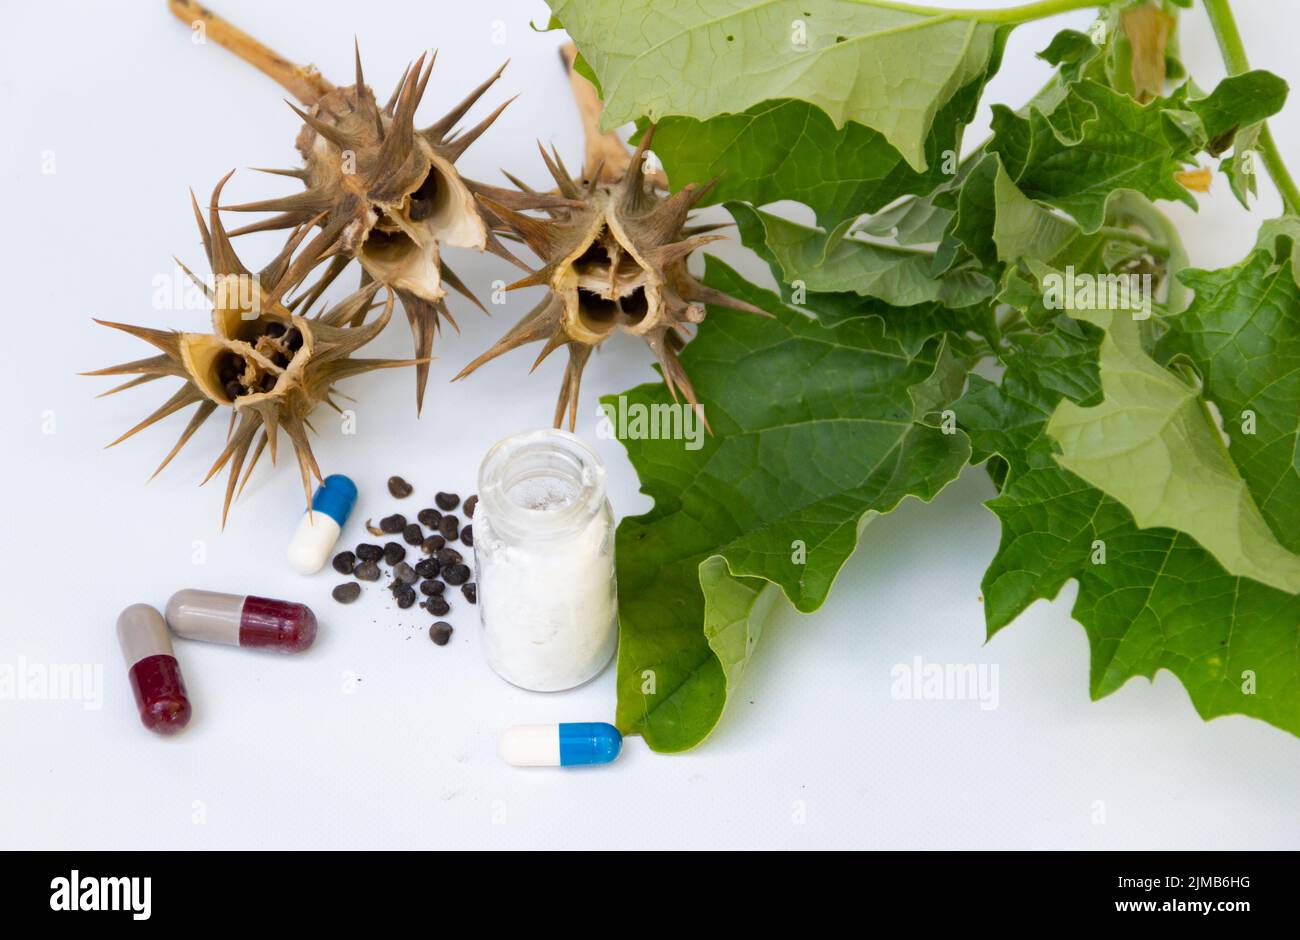 composition with seeds, leaves, capsules and burundanga powder Stock Photo